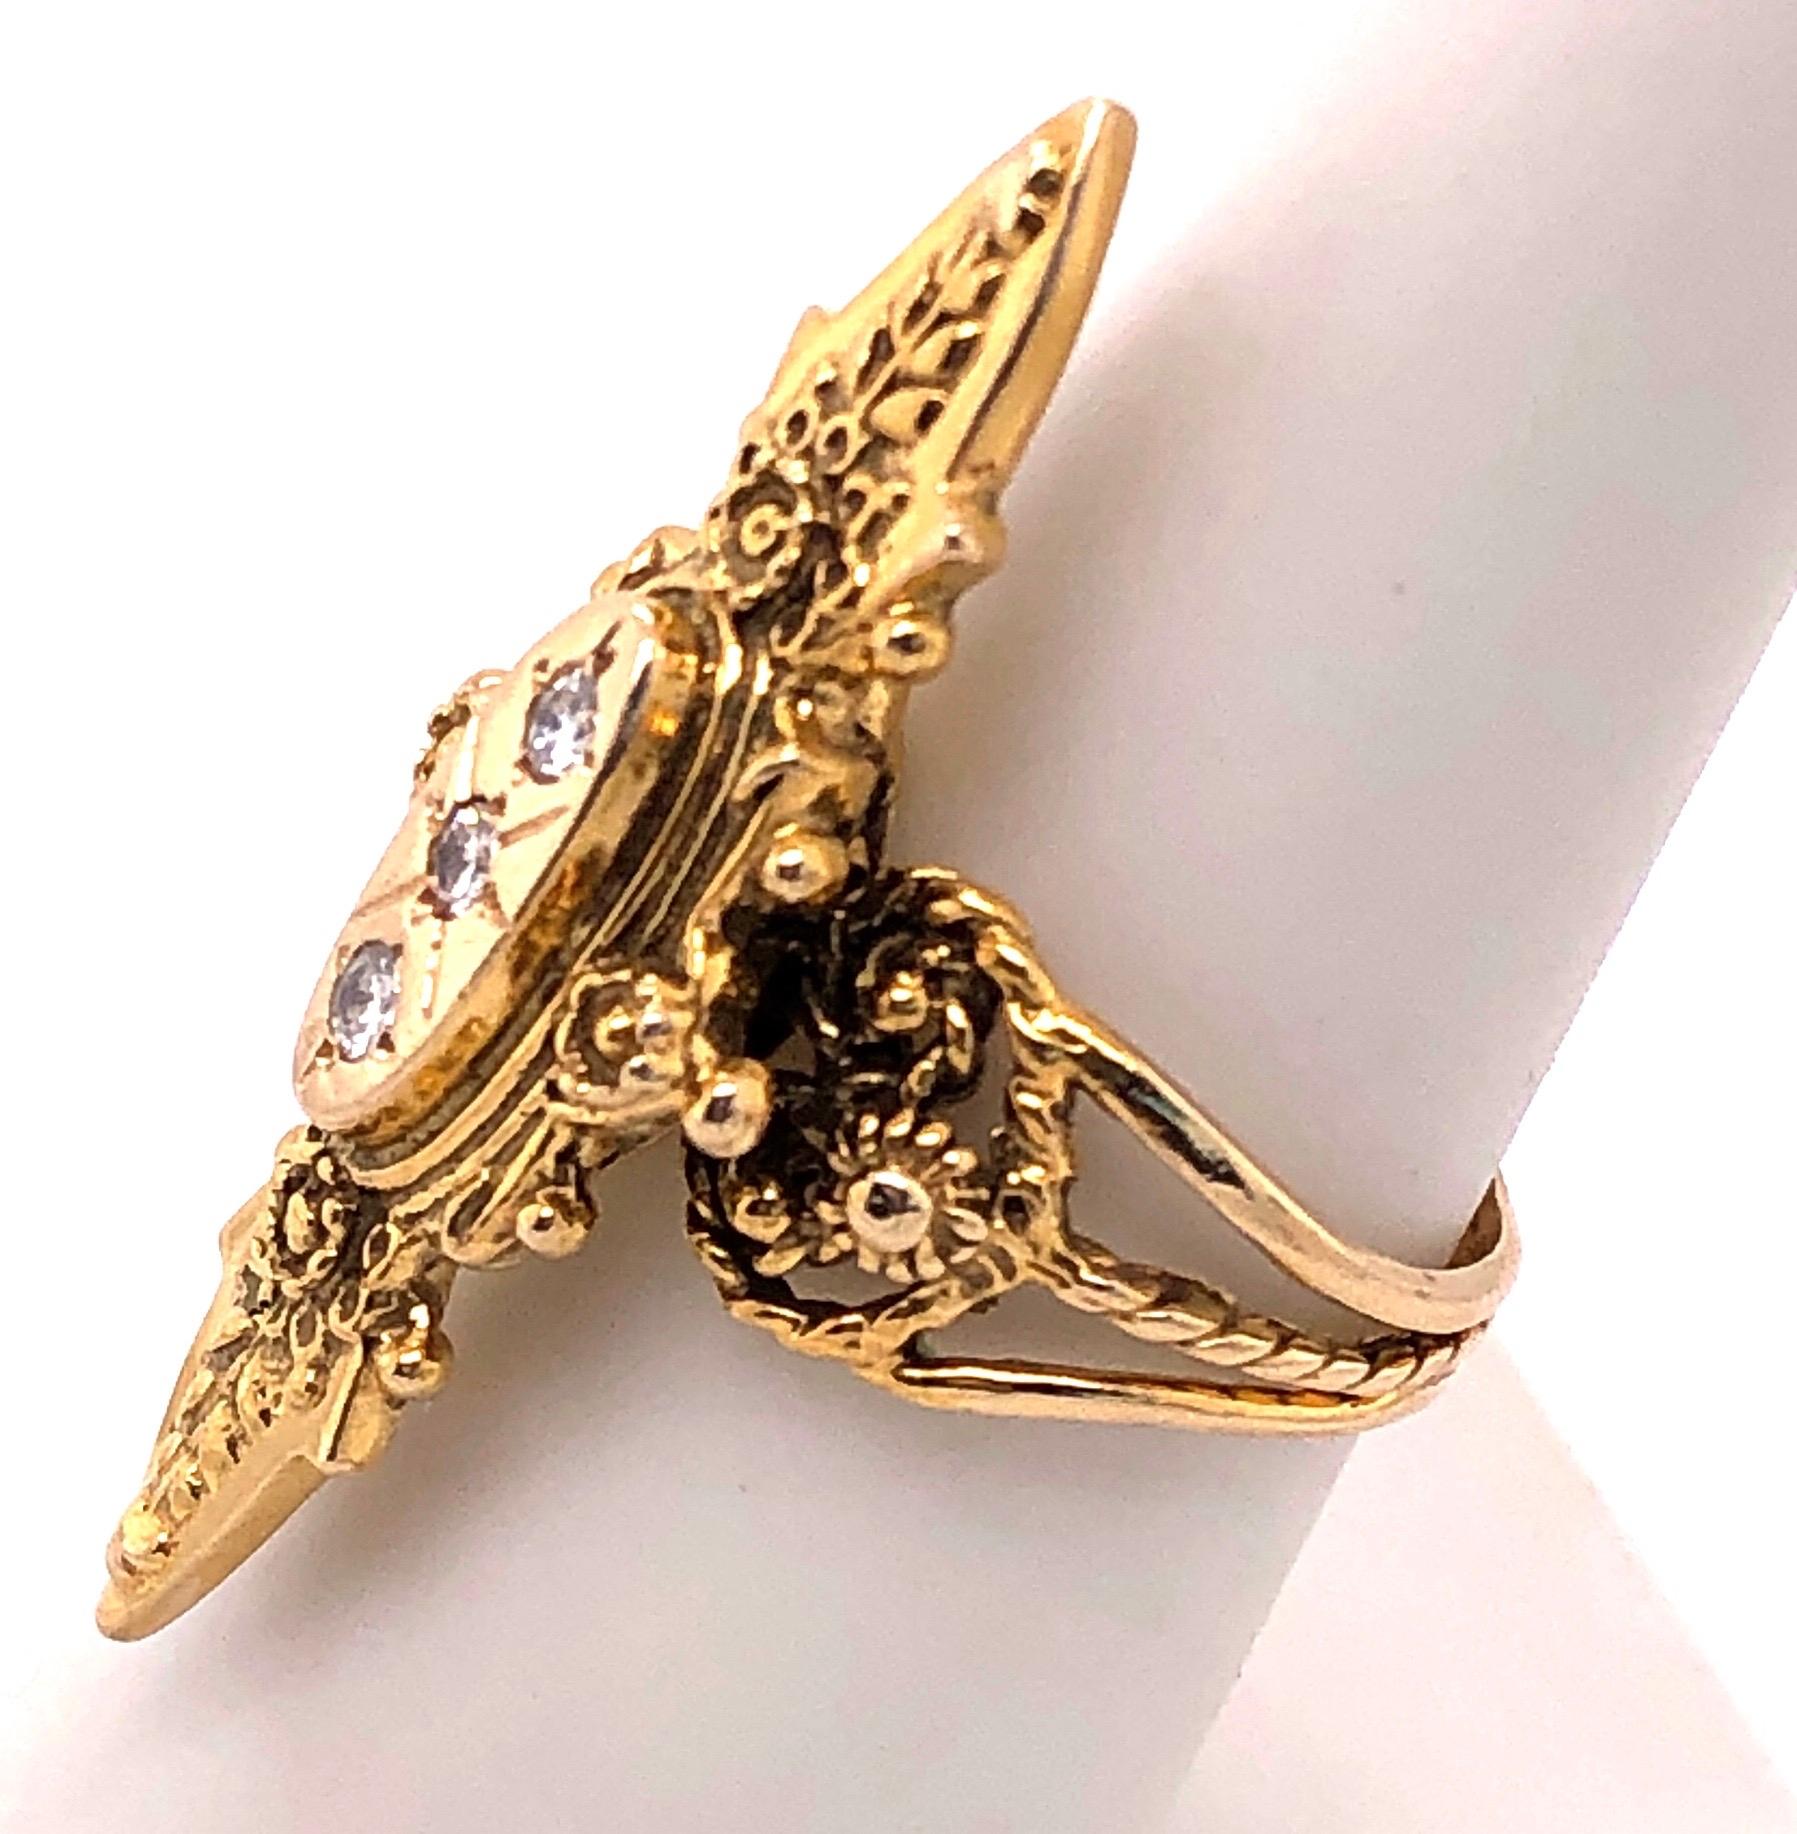 14 Karat Yellow Gold Free Form Ring with Three Round Diamonds.
0.25 Total diamond weight.
Size 7.75
6.83 grams total weight.
This ring can be resized however, we do not provide this service. You would have to have your local jeweler do this for you. 